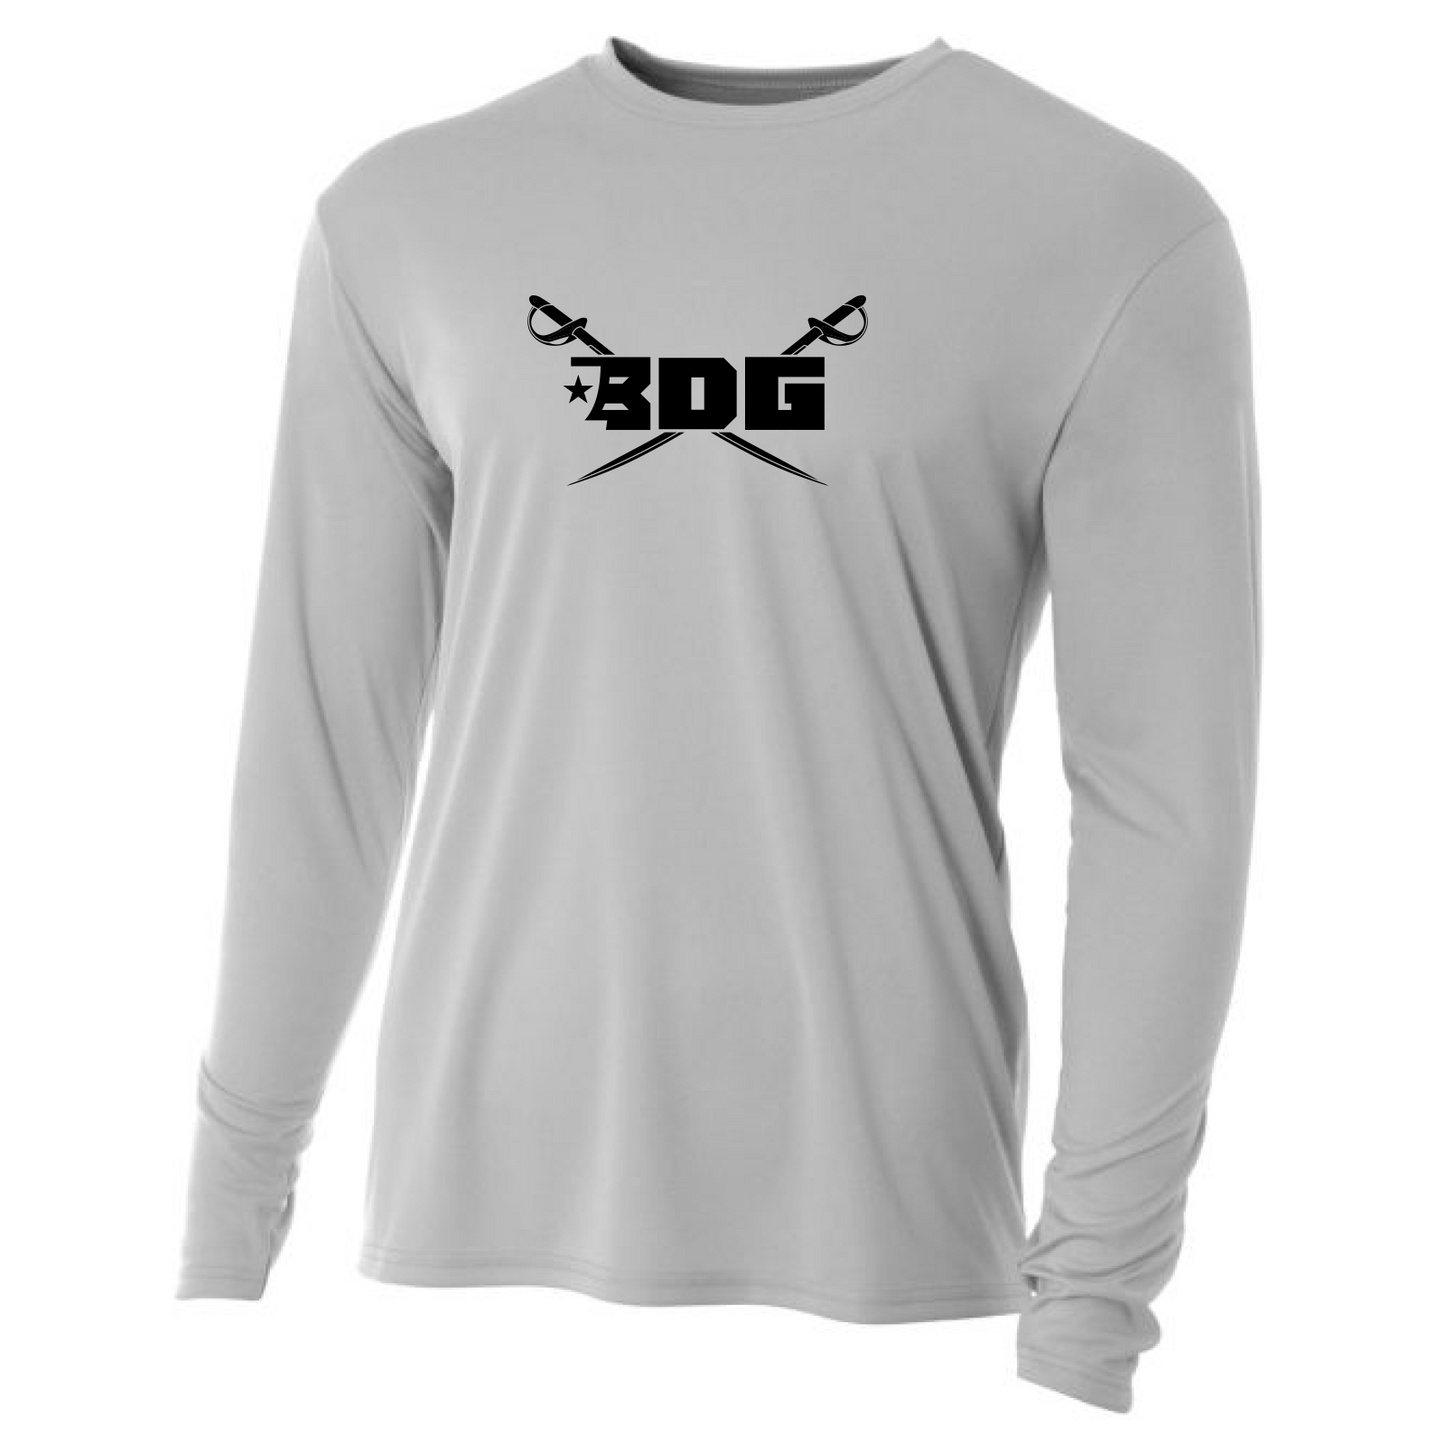 5-Star Cooling Performance Long Sleeve Crew